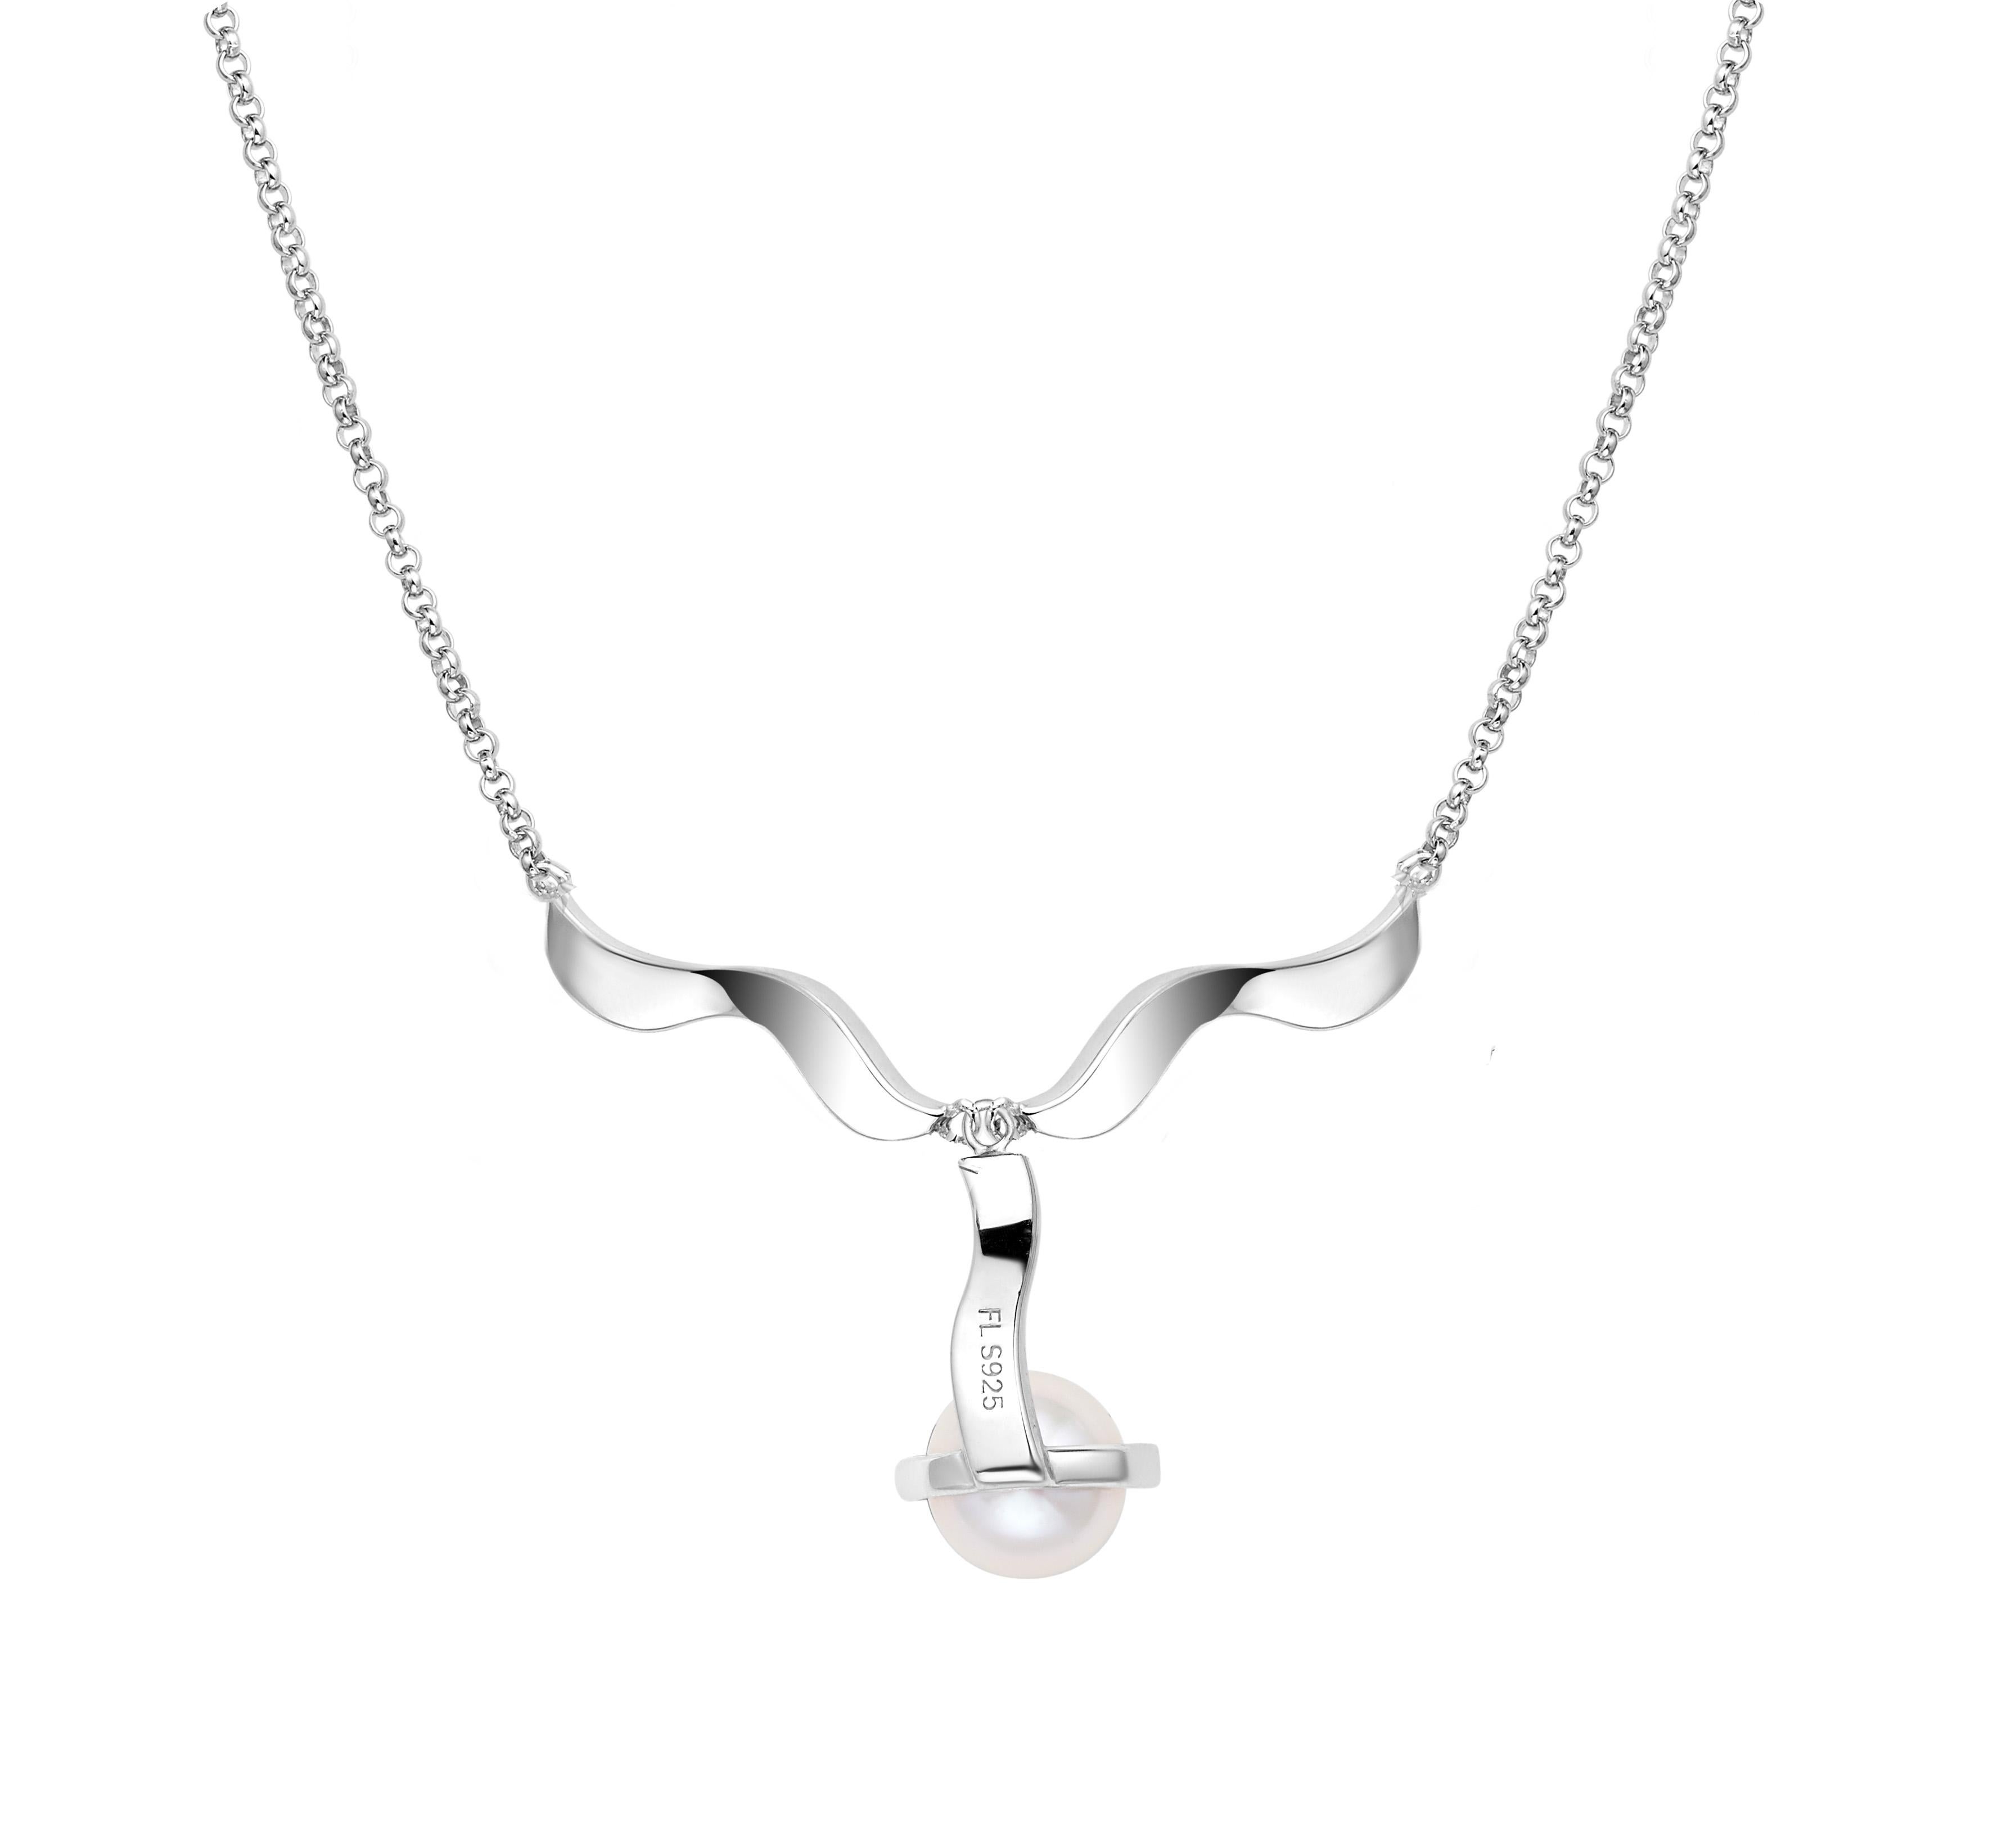 Contemporary Fei Liu Pirouette Necklace Sliver with Fresh Water Pearl